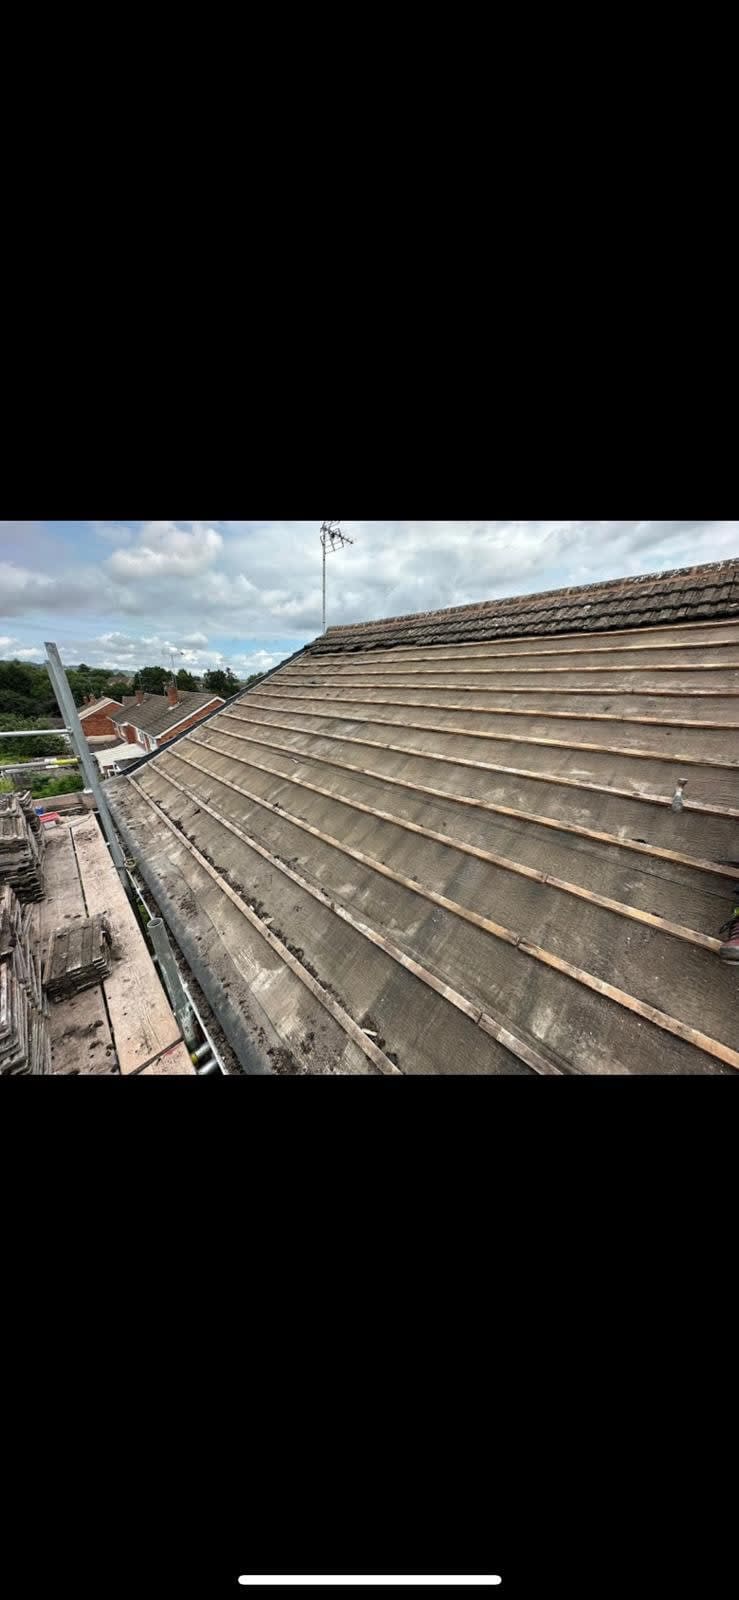 D and J Roofing Midlands Ltd Solihull 07988 253802